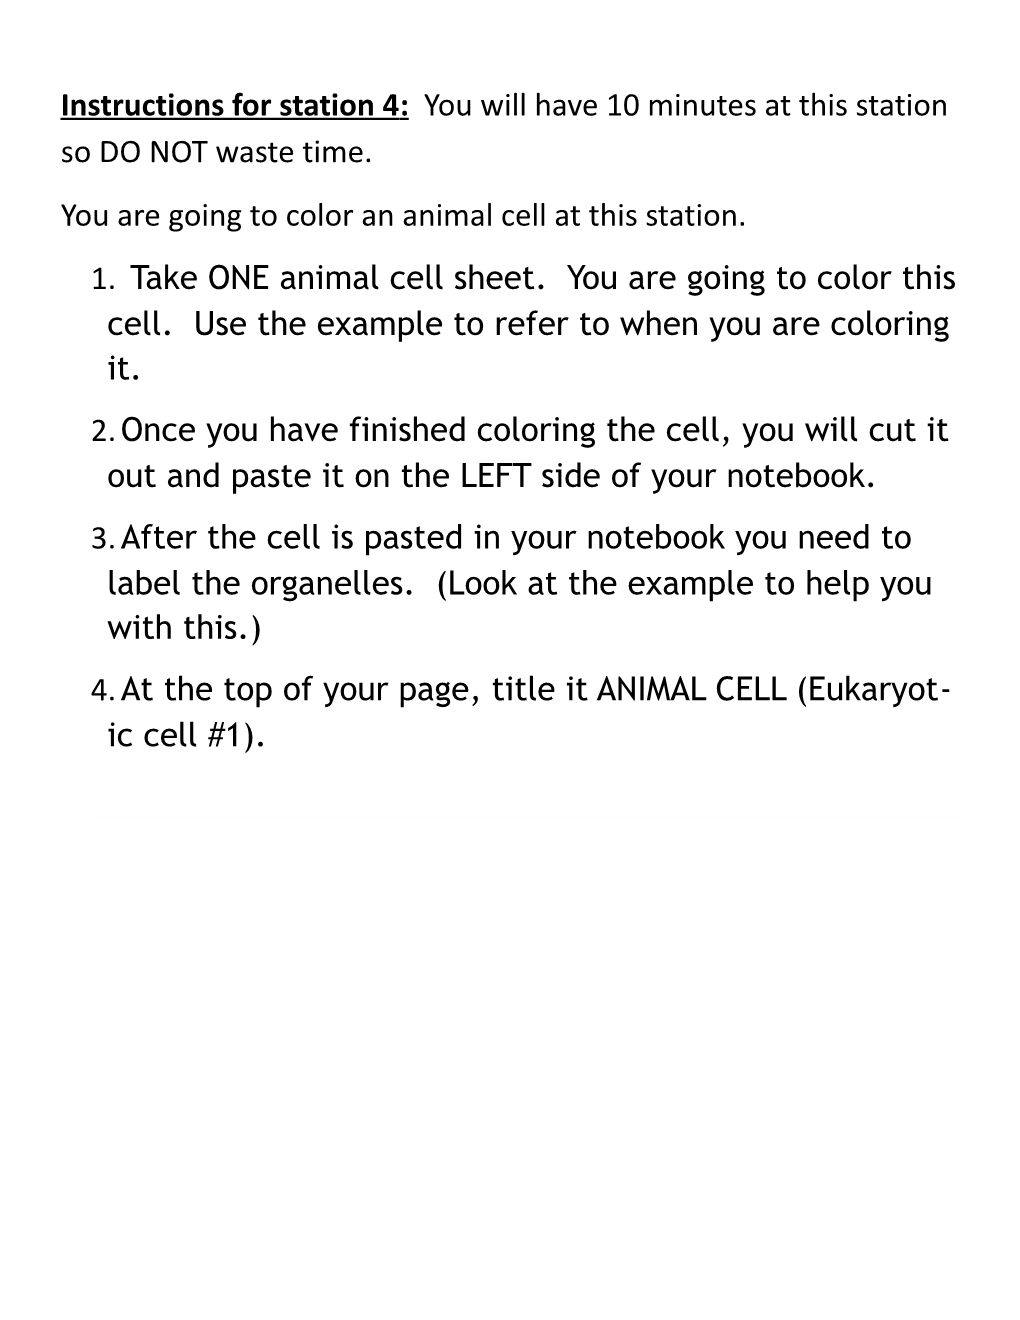 You Are Going to Color an Animal Cell at This Station